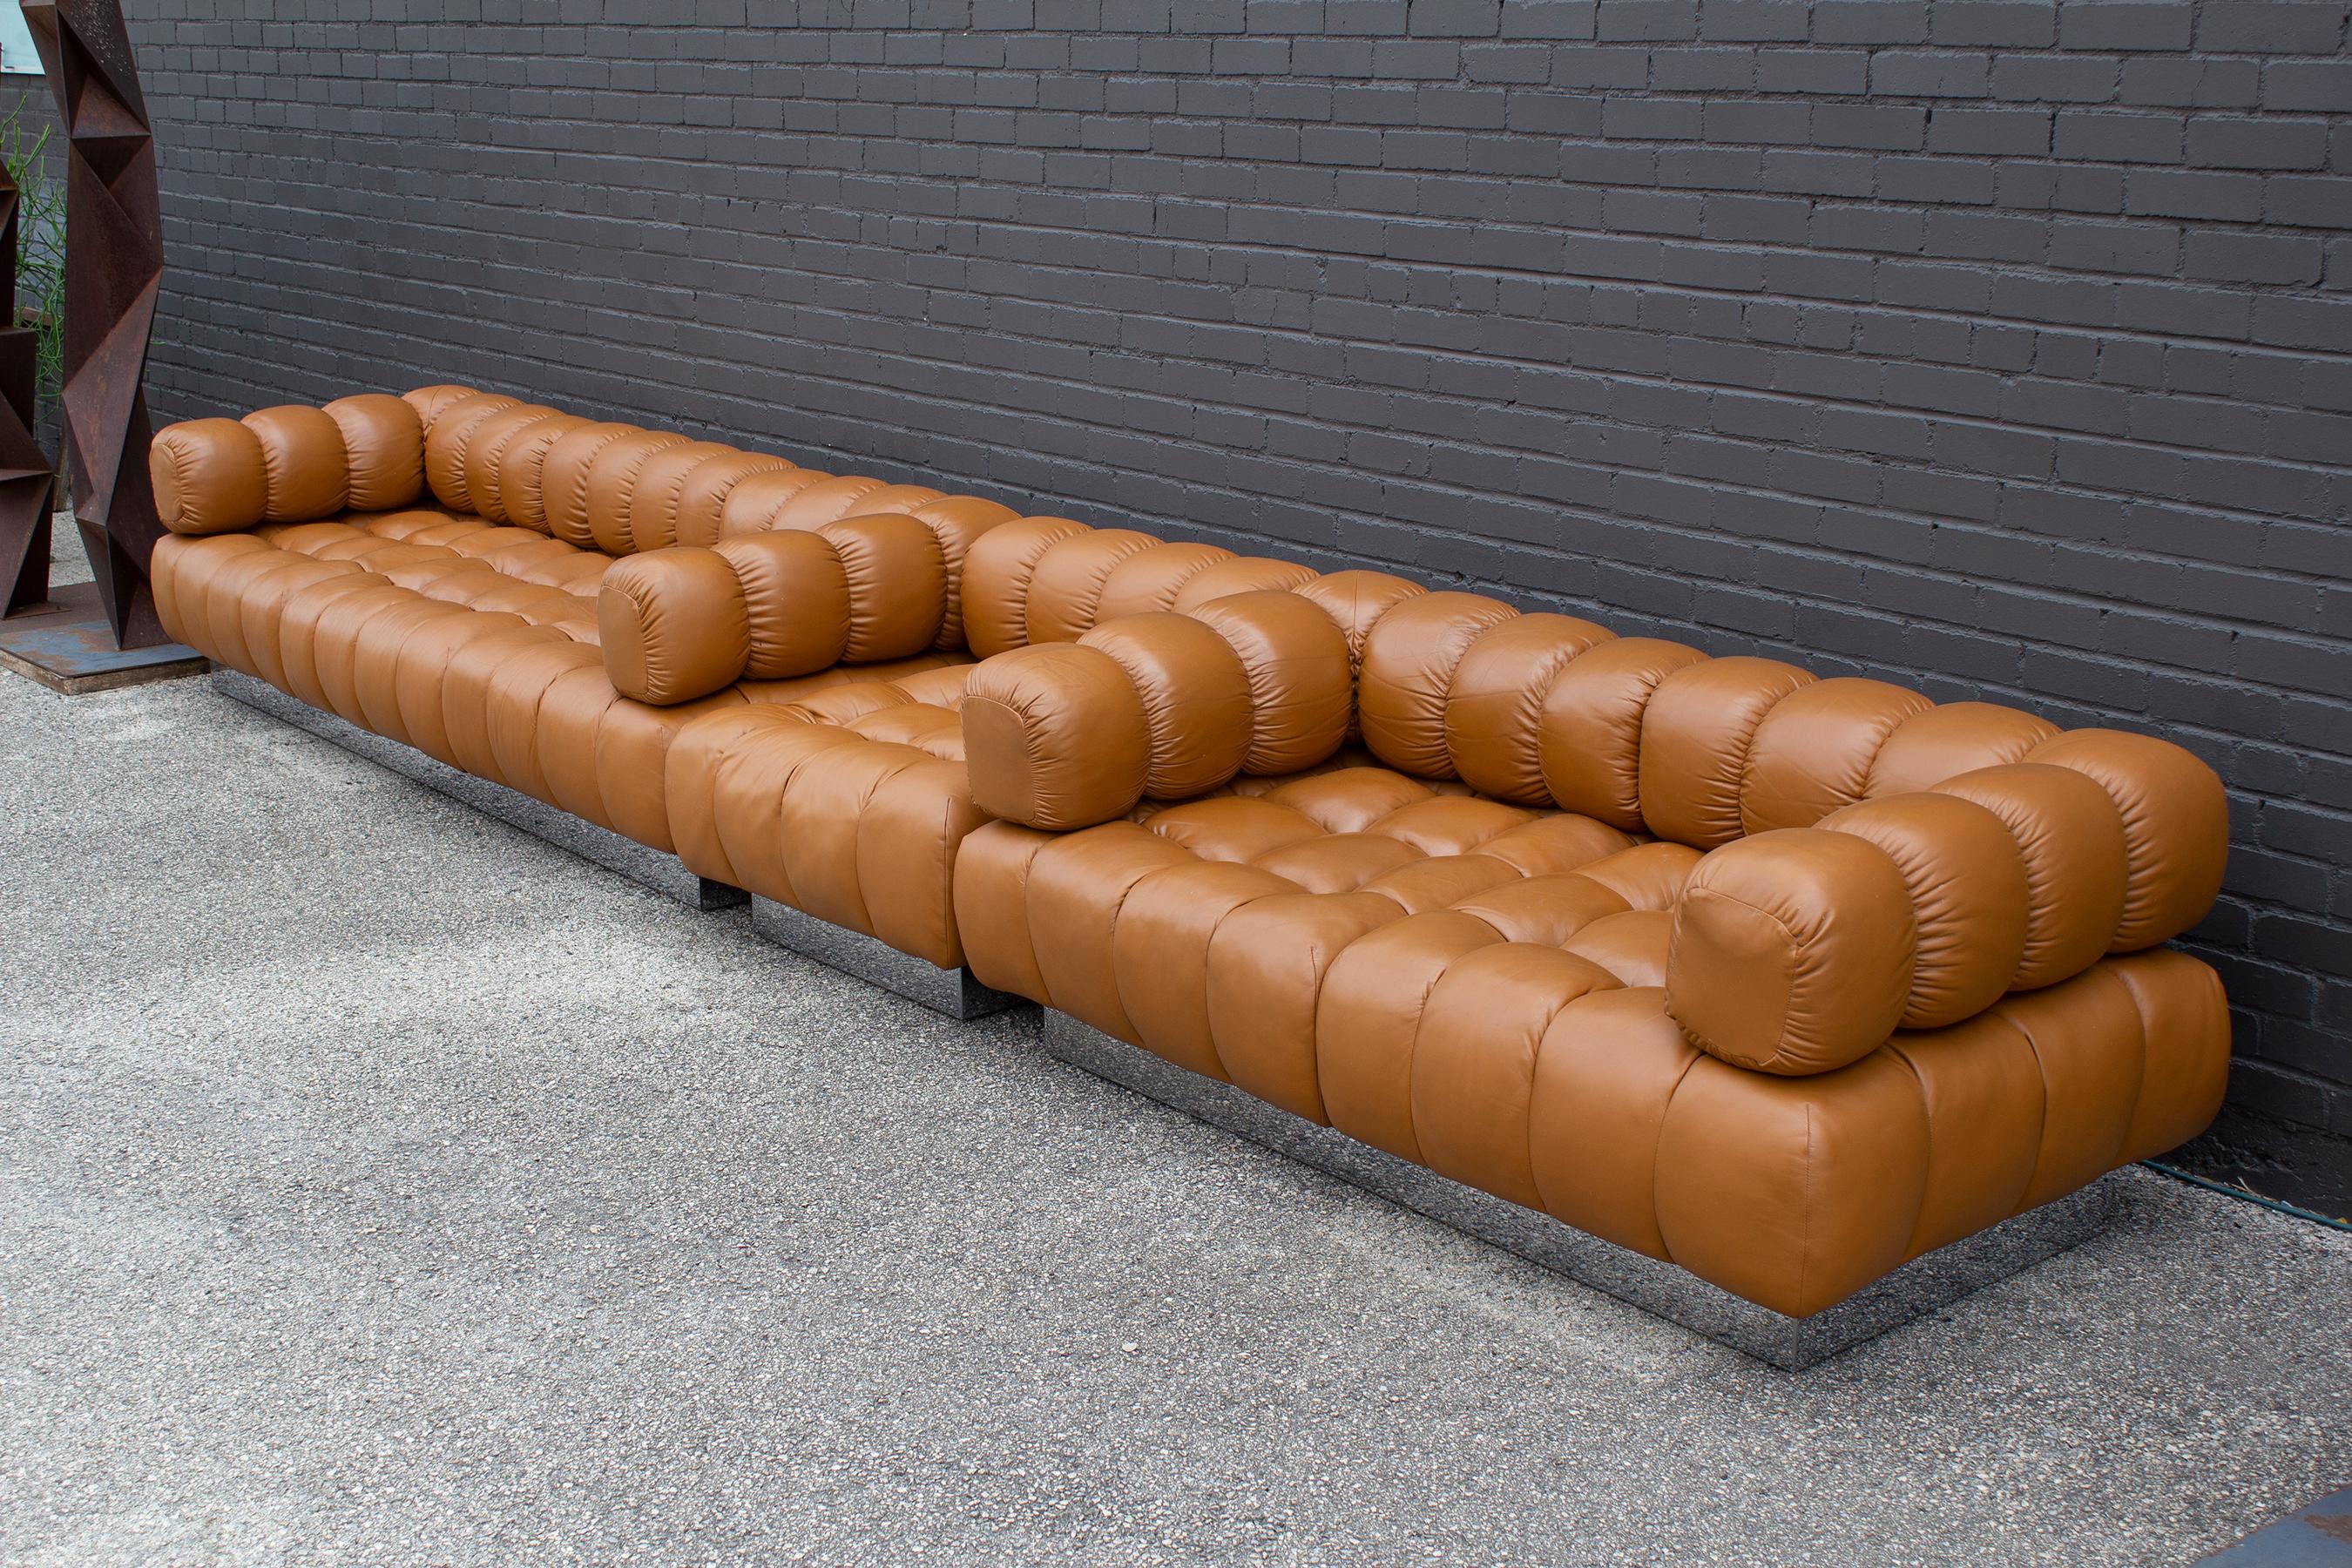 This three-piece Harvey Probber sectional seating arrangement includes a three-seater sofa, a two-seater settee, and an armless lounge chair in the
original Cognac Leather. This is the sexiest and most iconic design from Probber, who is often